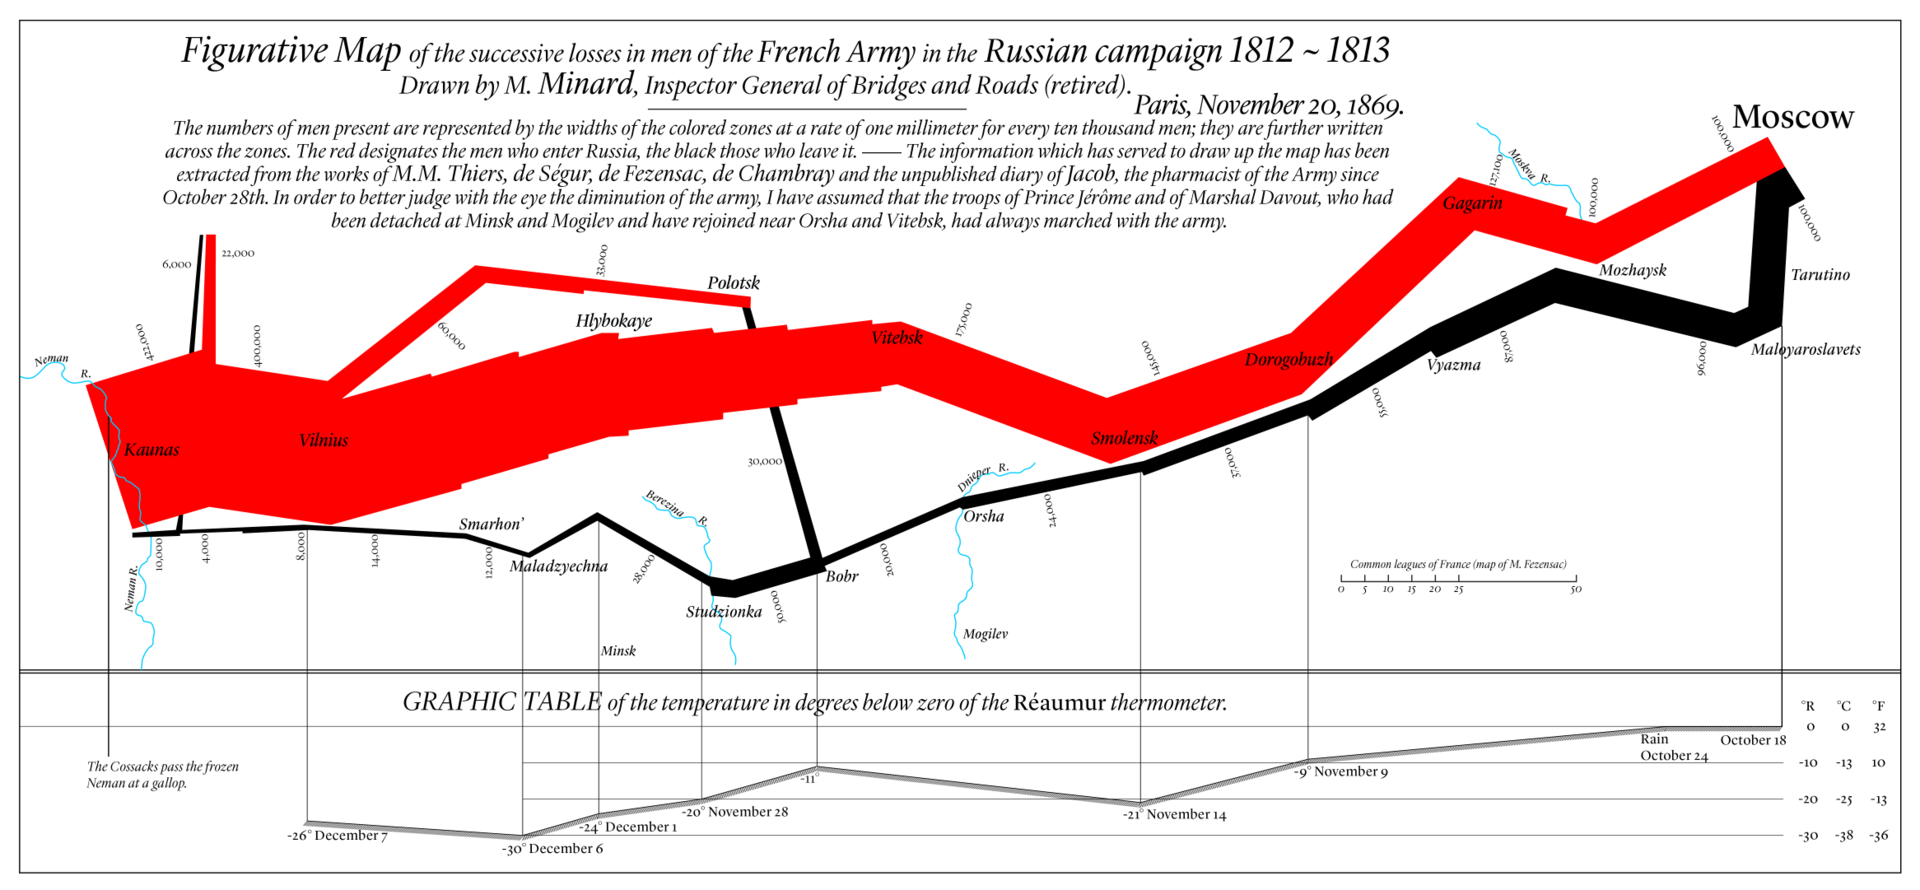 Figurative Map of the successive losses in men of the French Army in the Russian campaign 1812–1813.
Drawn by M. Minard, Inspector General of Bridges and Roads (retired). Paris, November 20, 1869.
The numbers of men present are represented by the widths of the colored zones at a rate of one millimeter for every ten thousand men; they are further written across the zones. The red designates the men who enter Russia, the black those who leave it. — The information which has served to draw up the map has been extracted from the works of M. M. Thiers, de Ségur, de Fezensac, de Chambray and the unpublished diary of Jacob, the pharmacist of the Army since October 28th.
In order to better judge with the eye the diminution of the army, I have assumed that the troops of Prince Jérôme and of Marshal Davout, who had been detached at Minsk and Mogilev and have rejoined near Orsha and Vitebsk, had always marched with the army.